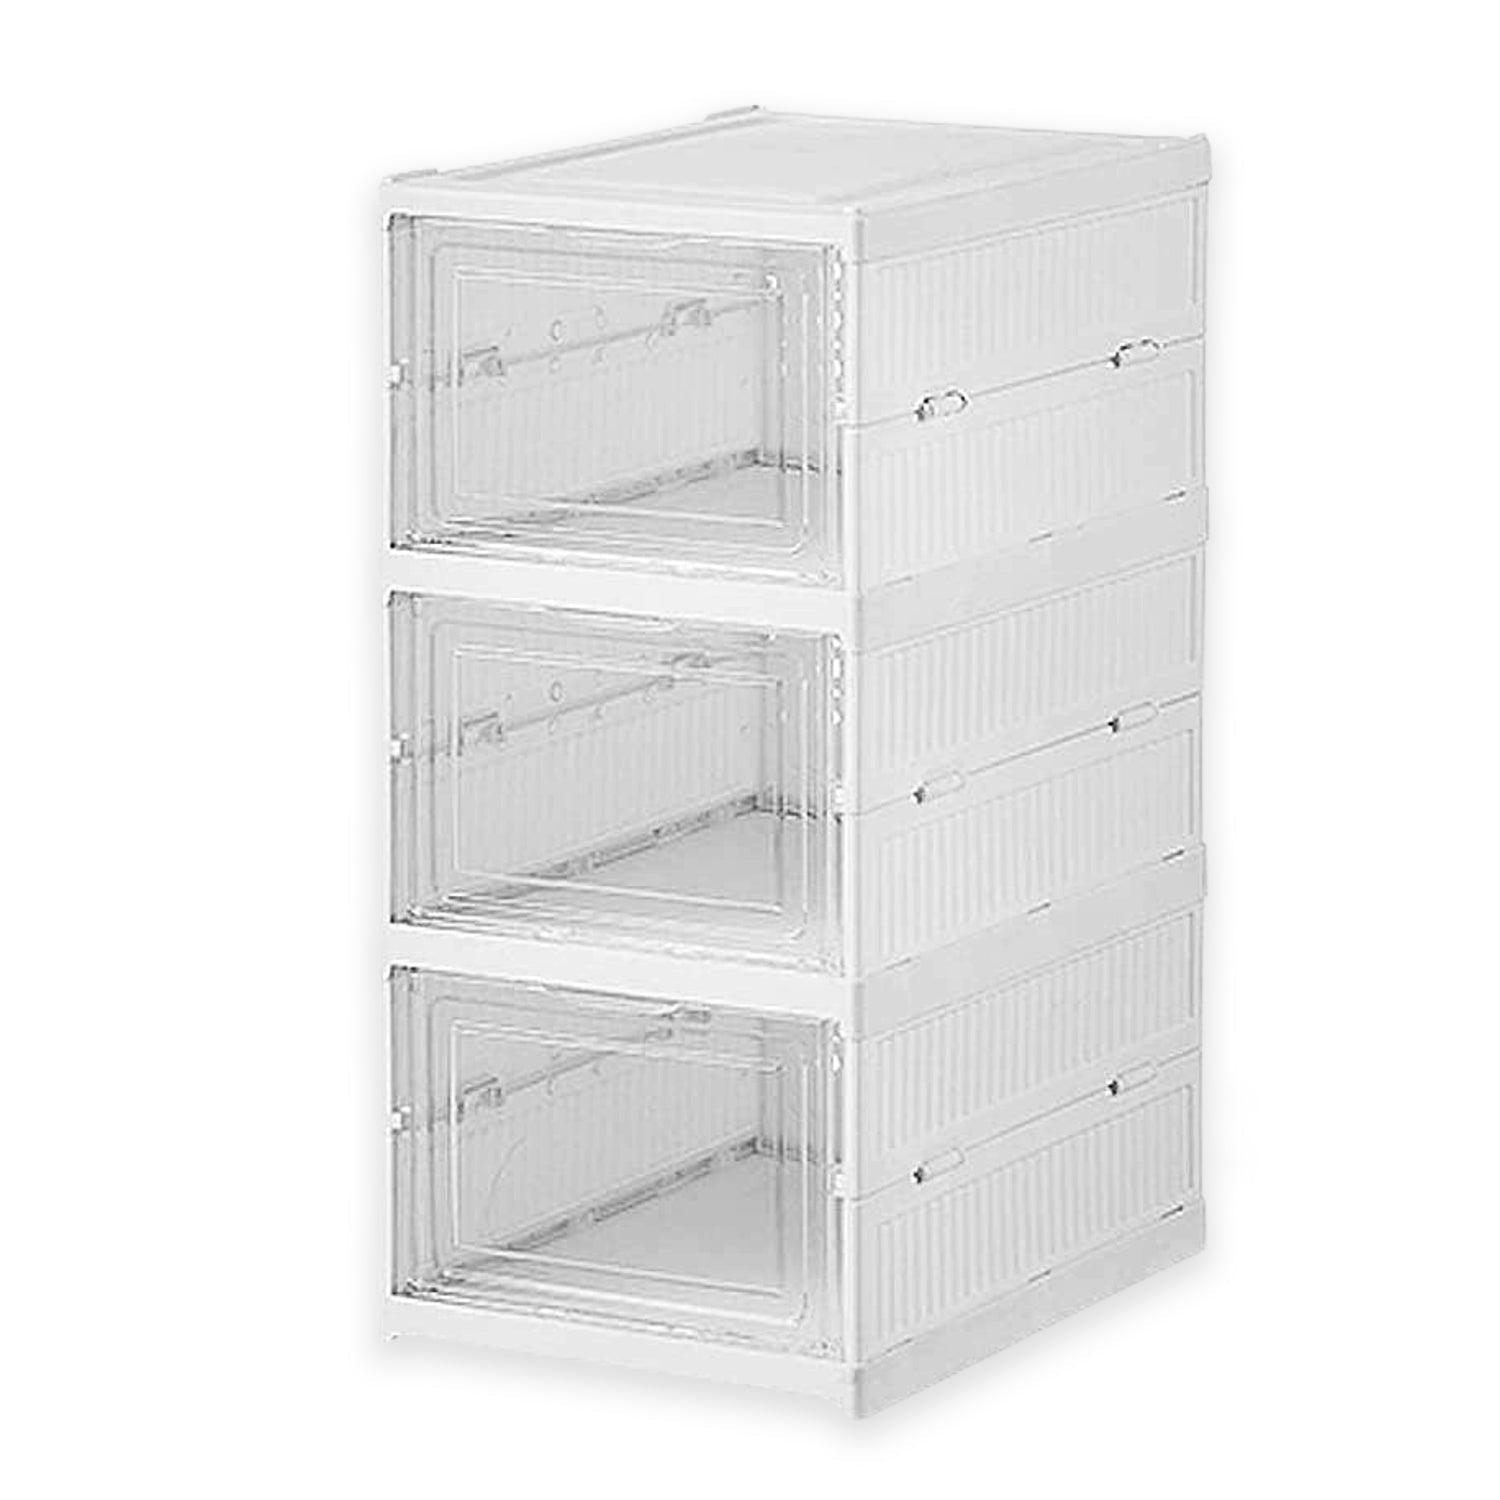 Stackable Multifunctional Storage, for Clothes Foldable Drawer Shelf Basket Utility Cart Rack Storage Organizer Cart for Kitchen, Pantry Closet, Bedroom, Bathroom, Laundry (2, 3, 4, 5, 6 / Layer 1 Pc)